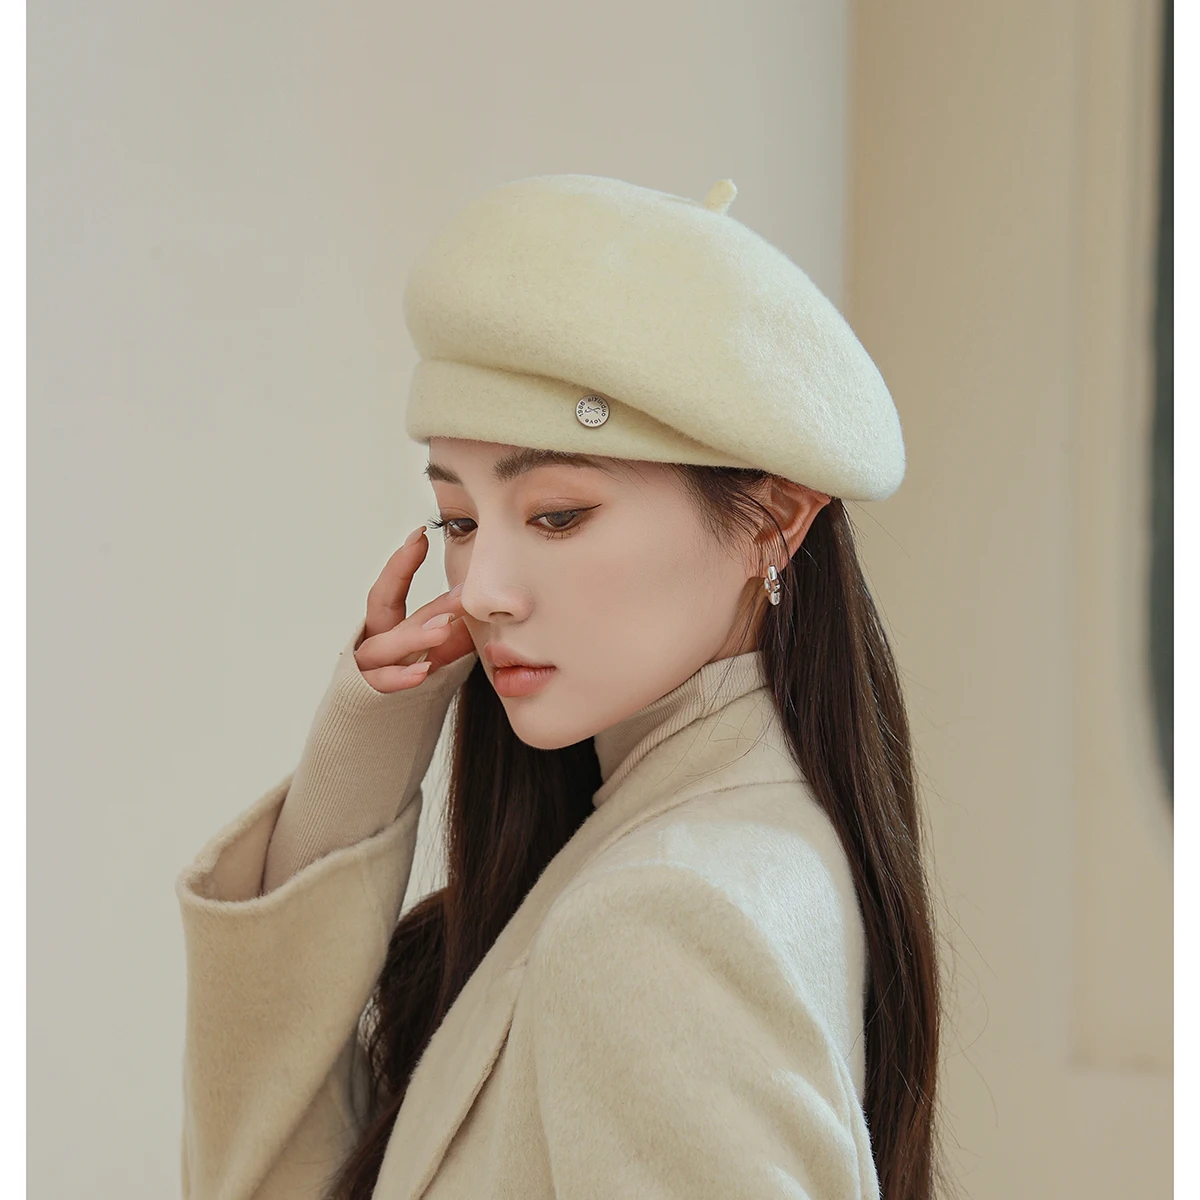 

Wool Beret Hat Solid Color French Beret Hat Artist Berets Cap for Women Girls Fashionable Winter Fashion Lady Hat